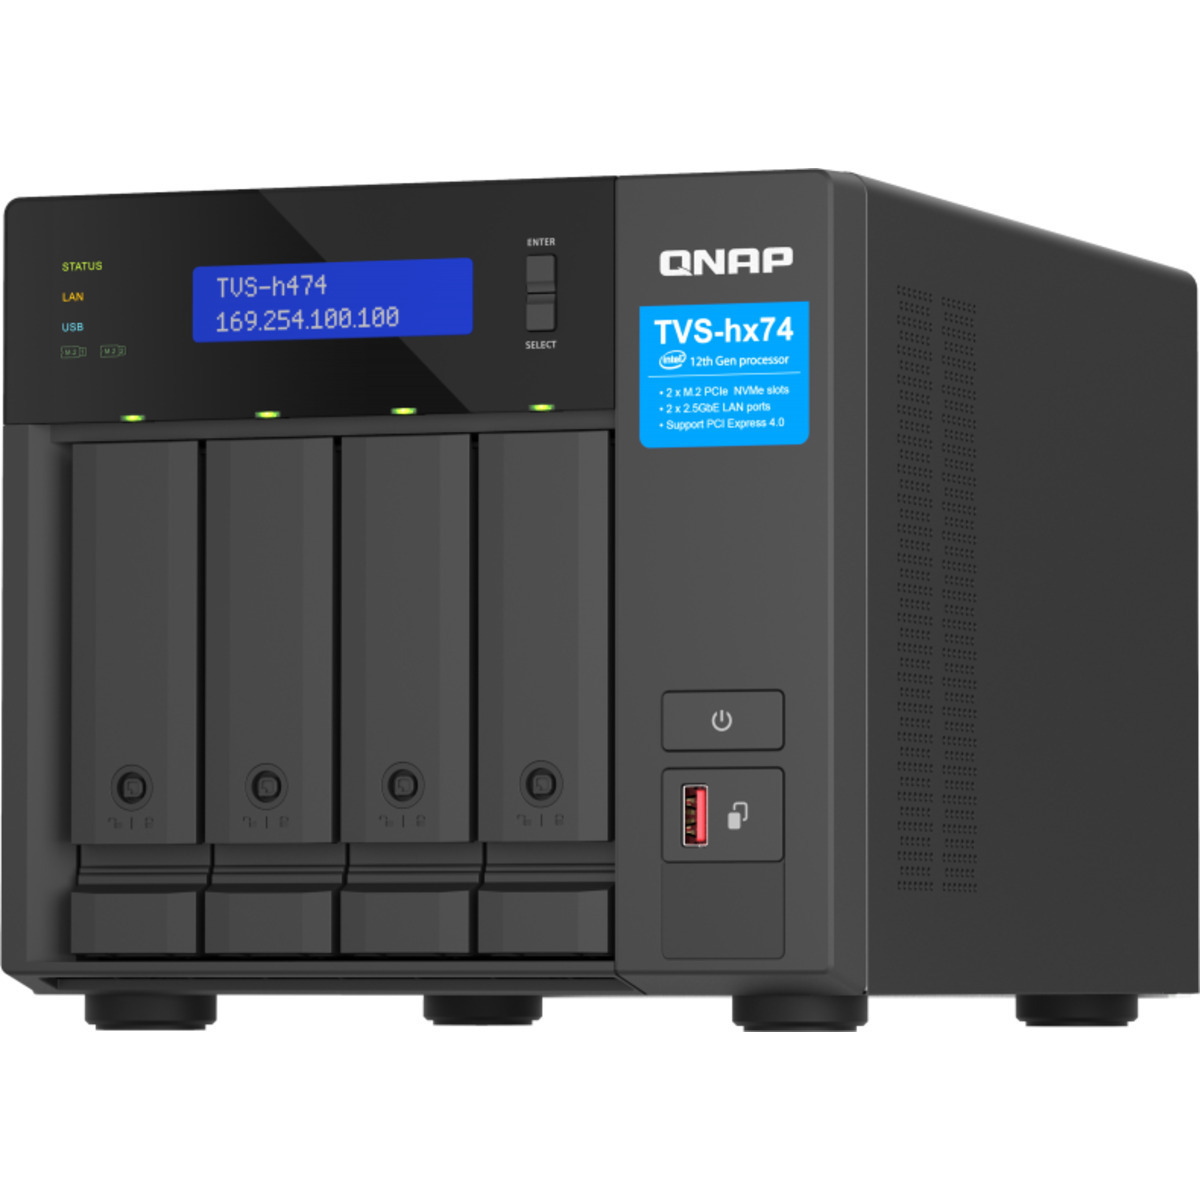 buy $2665 QNAP TVS-h474 Pentium Gold 48tb Desktop NAS - Network Attached Storage Device 4x12000gb Seagate IronWolf Pro ST12000NT001 3.5 7200rpm SATA 6Gb/s HDD NAS Class Drives Installed - Burn-In Tested - FREE RAM UPGRADE - nas headquarters buy network attached storage server device das new raid-5 free shipping simply usa TVS-h474 Pentium Gold